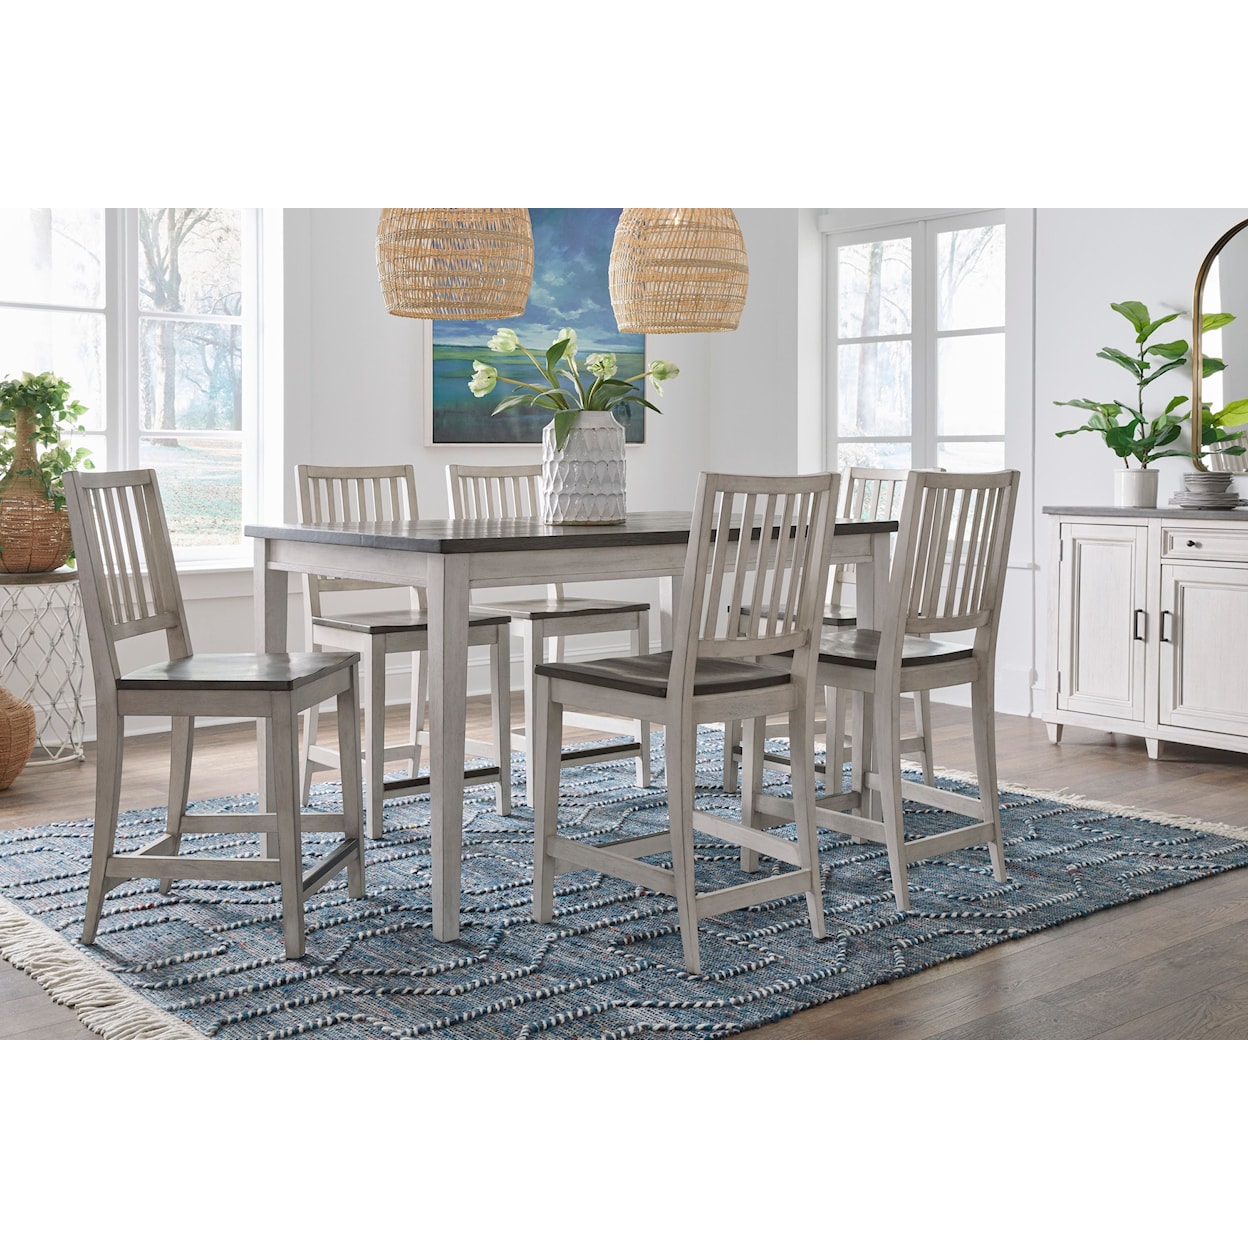 Aspenhome Caraway Counter Height Dining Table